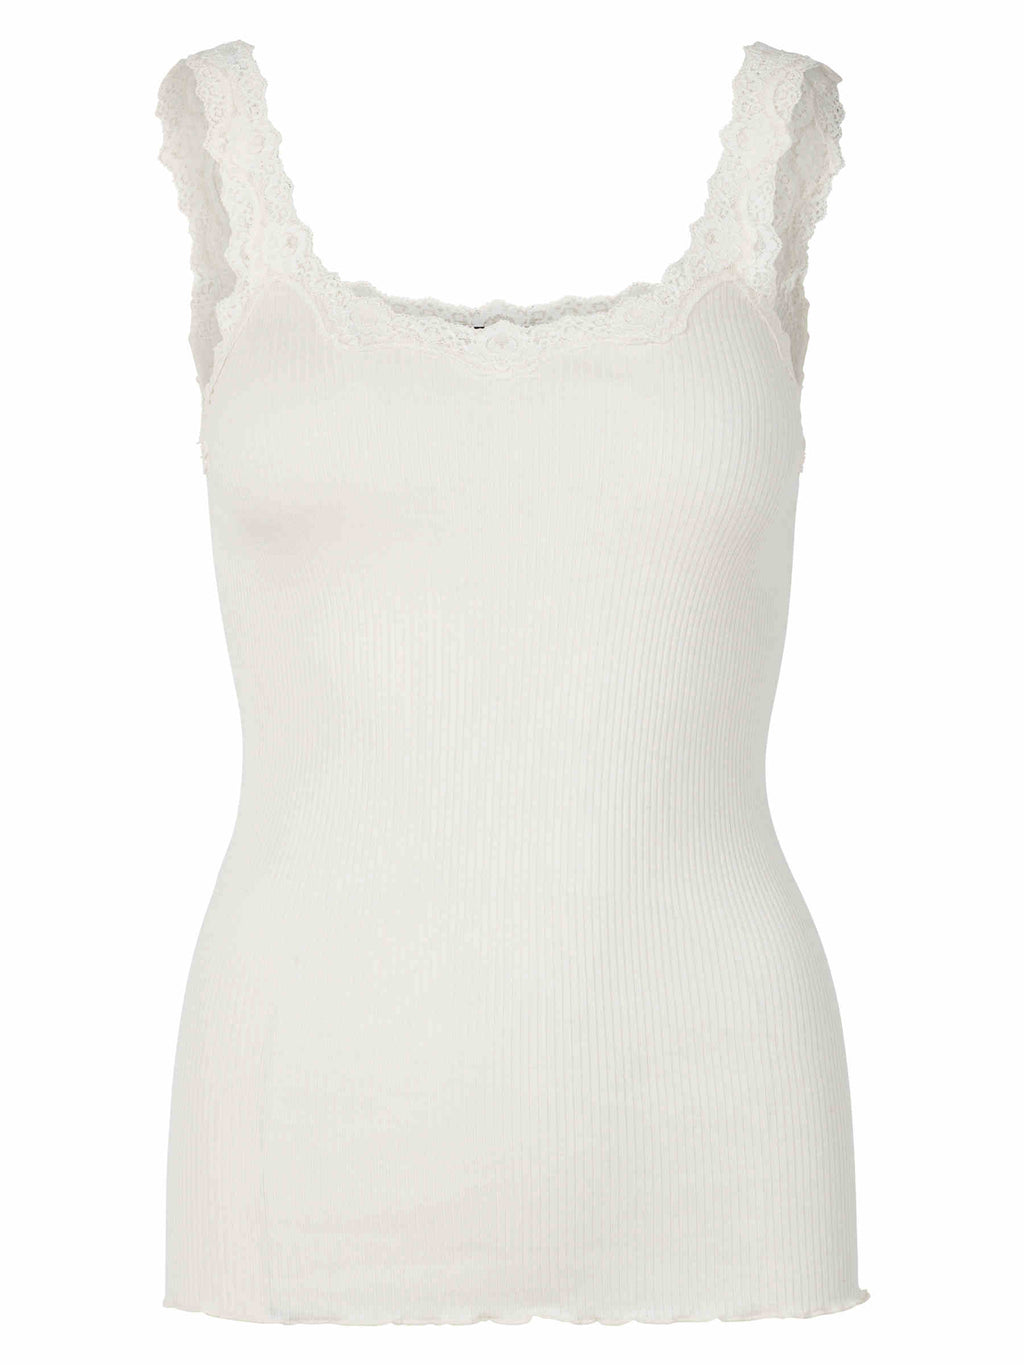 Rosemunde - silk top with beautiful lace details ivory off-white